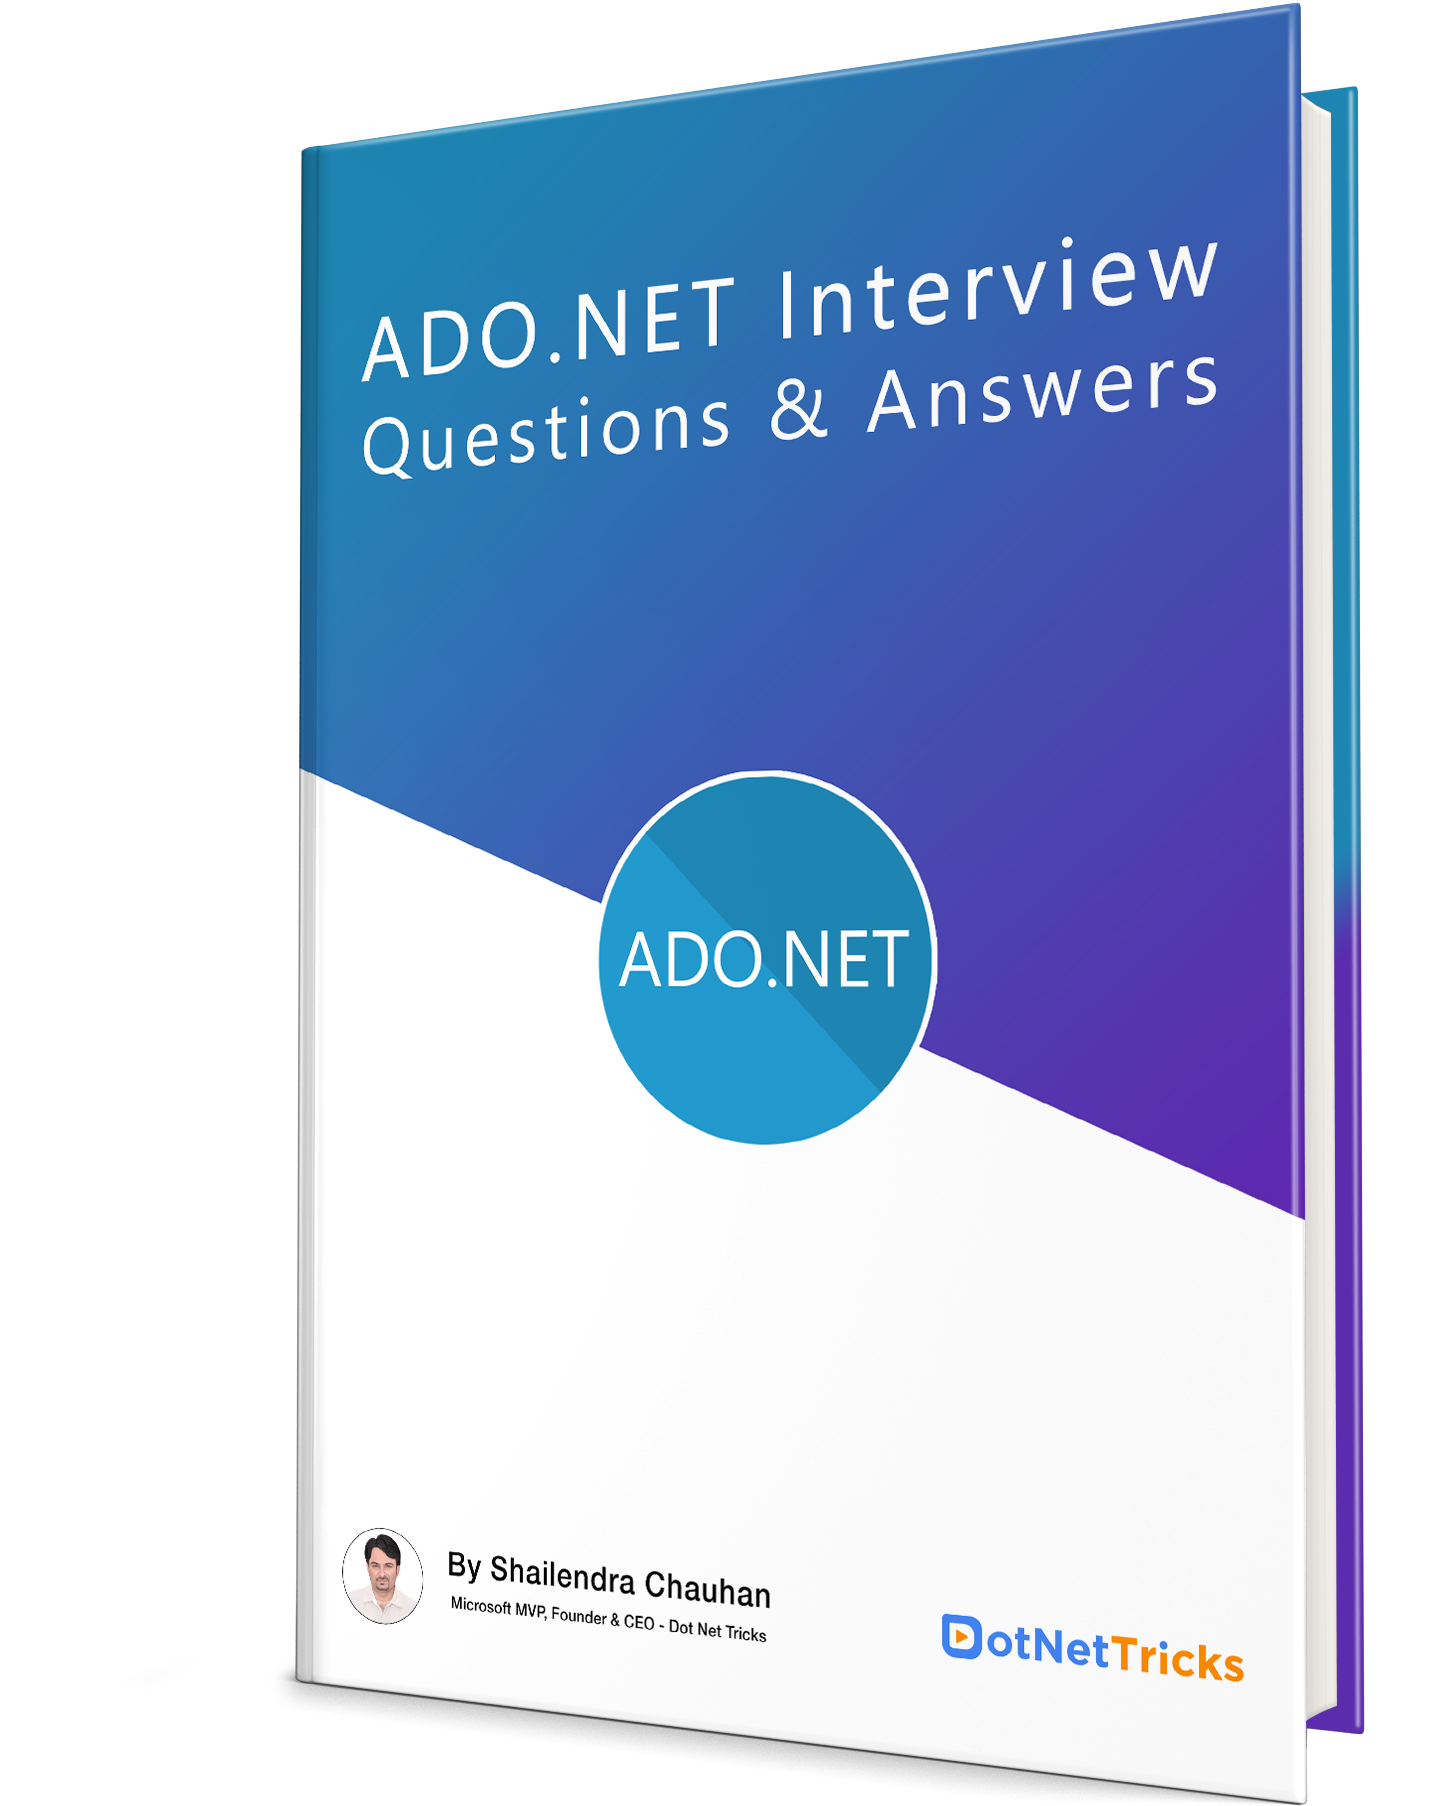 ADO.NET Interview Questions and Answers Book